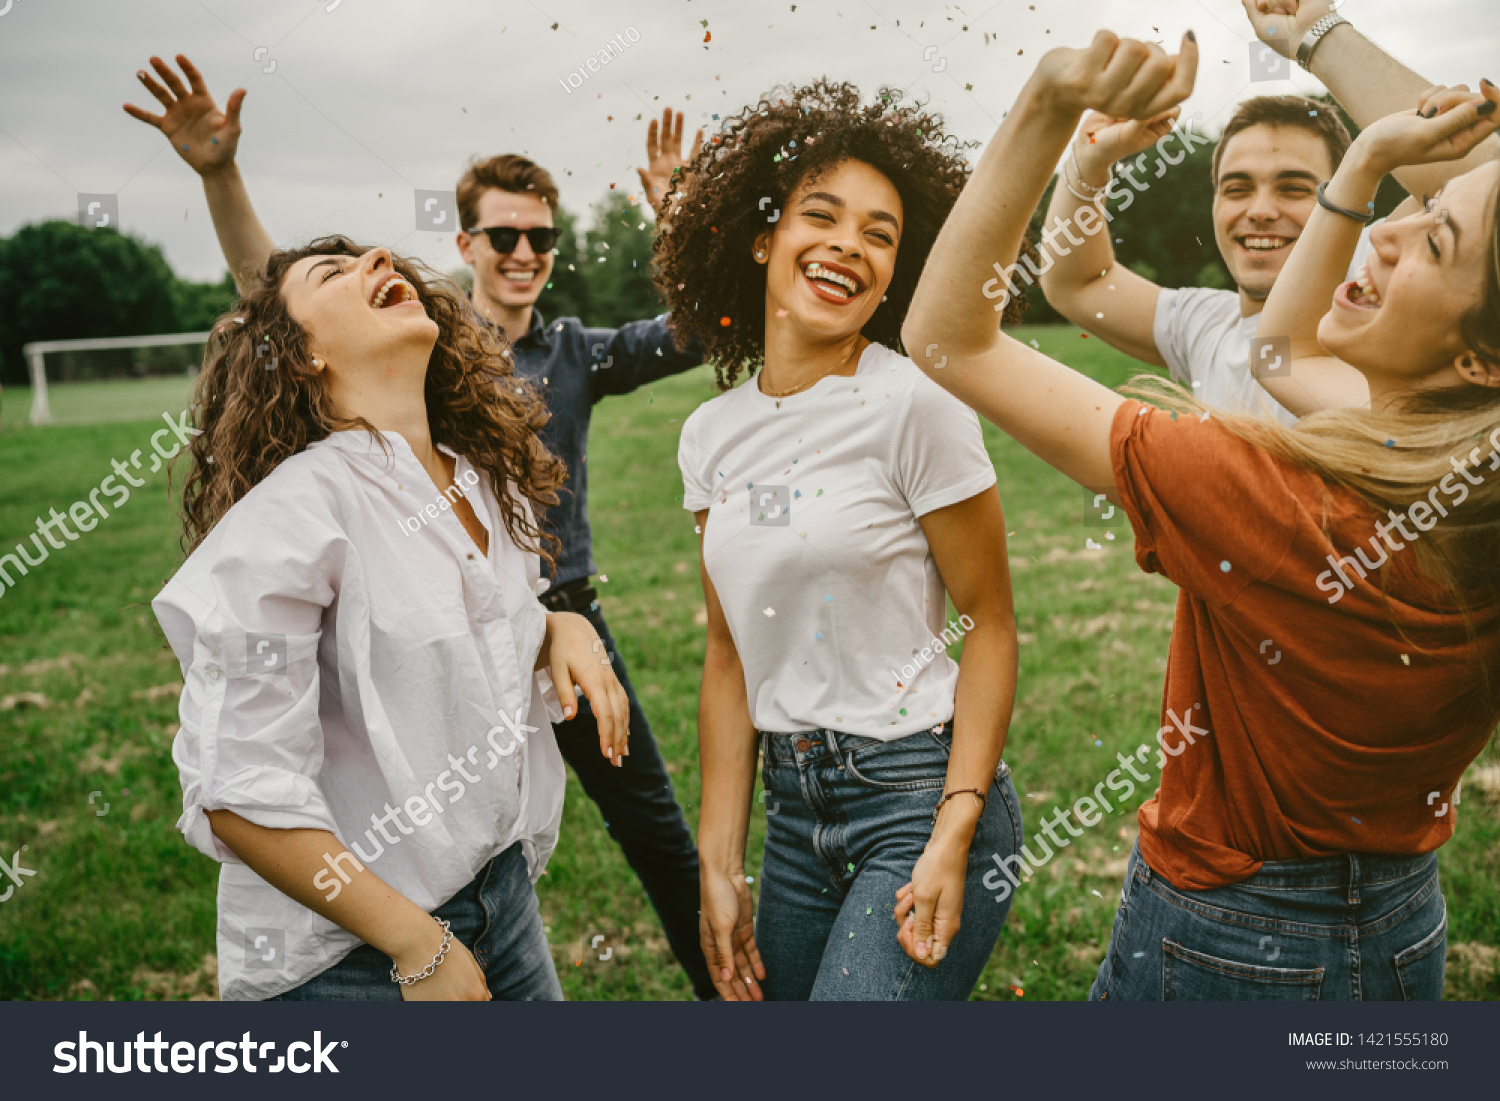 Group of five friends having fun at the park - Millennials dancing in a meadow among confetti thrown in the air - Day of freedom and carefree #1421555180